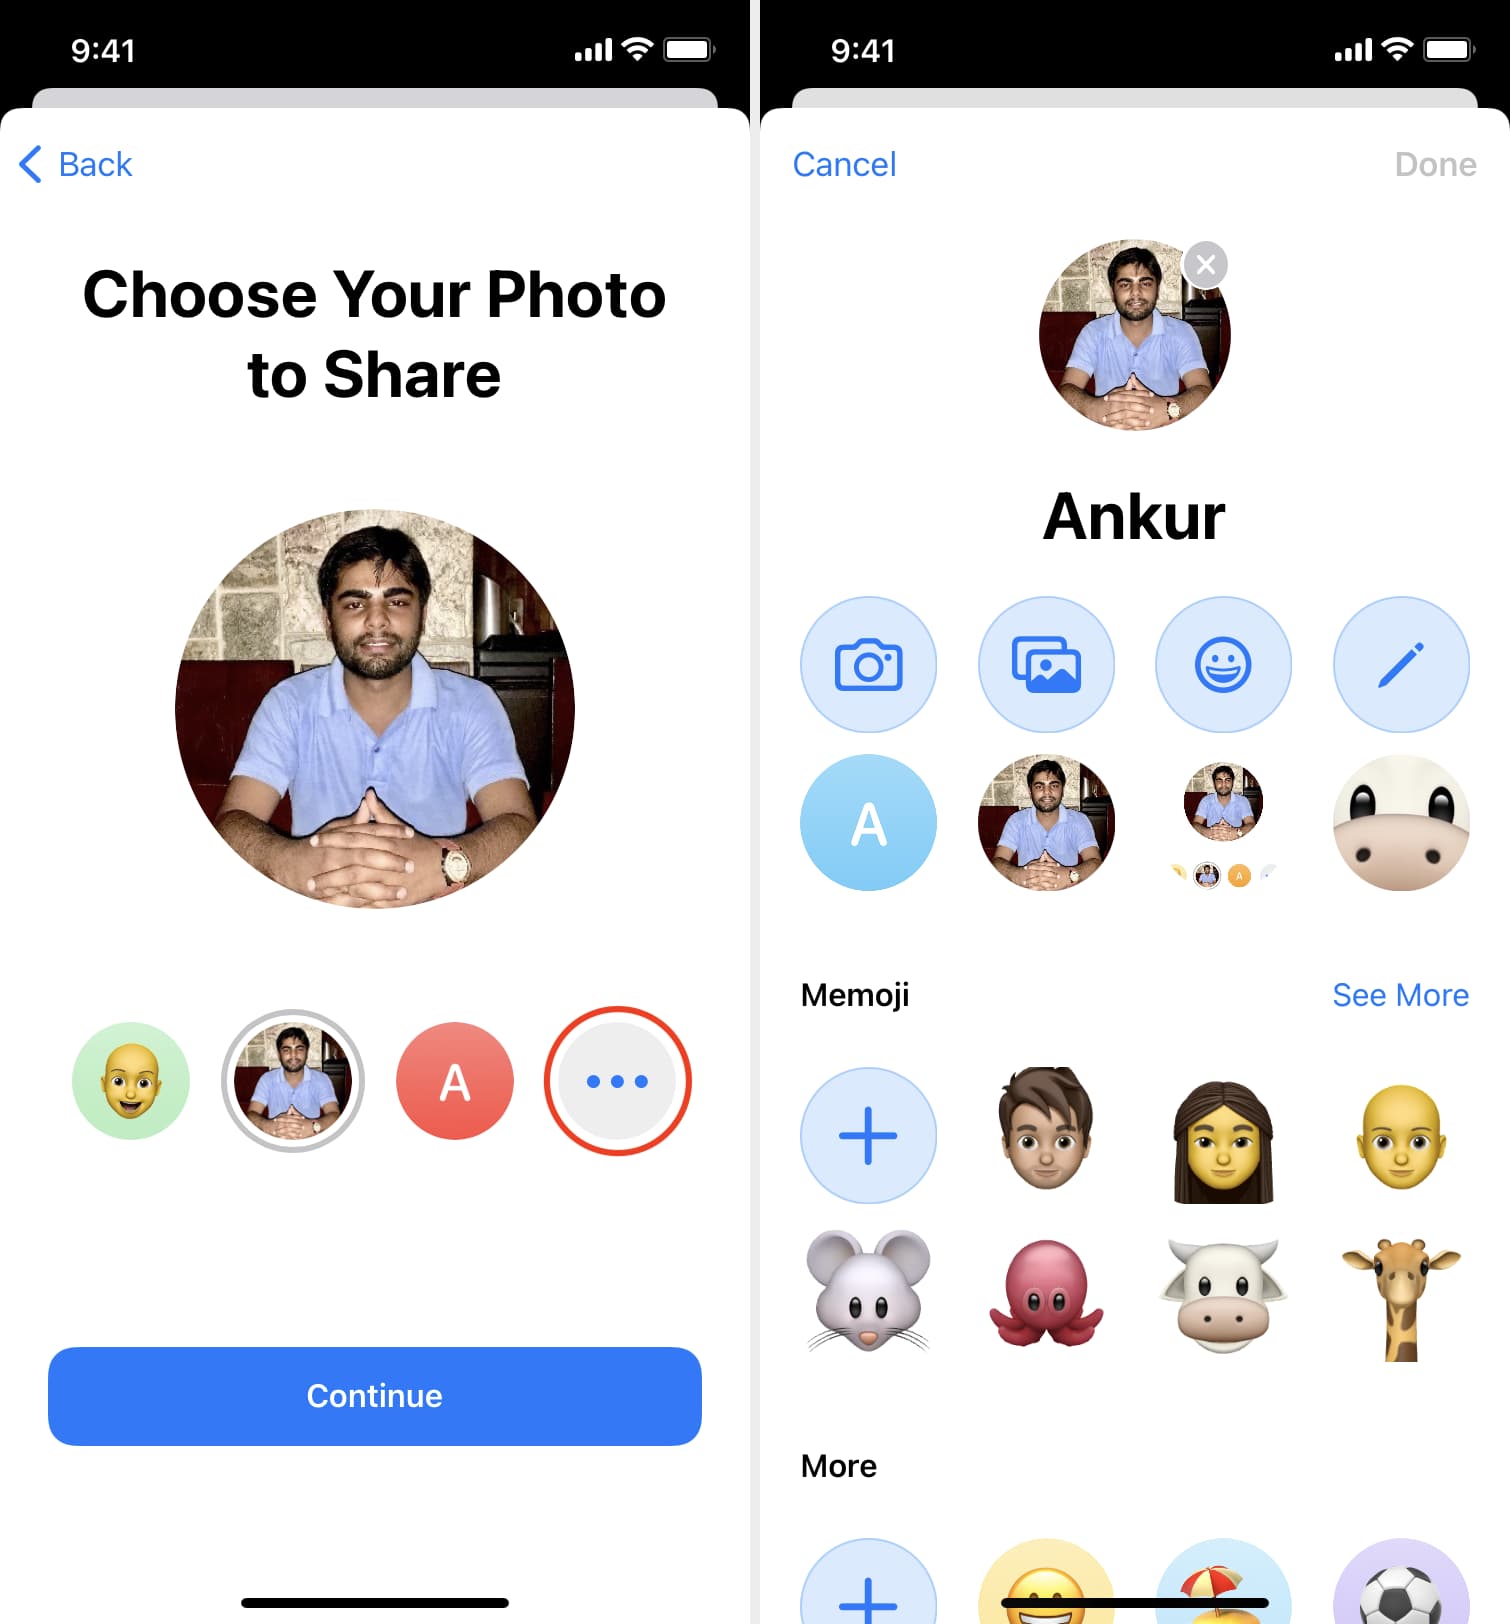 Choose Your Photo to Share in iPhone Messages Settings